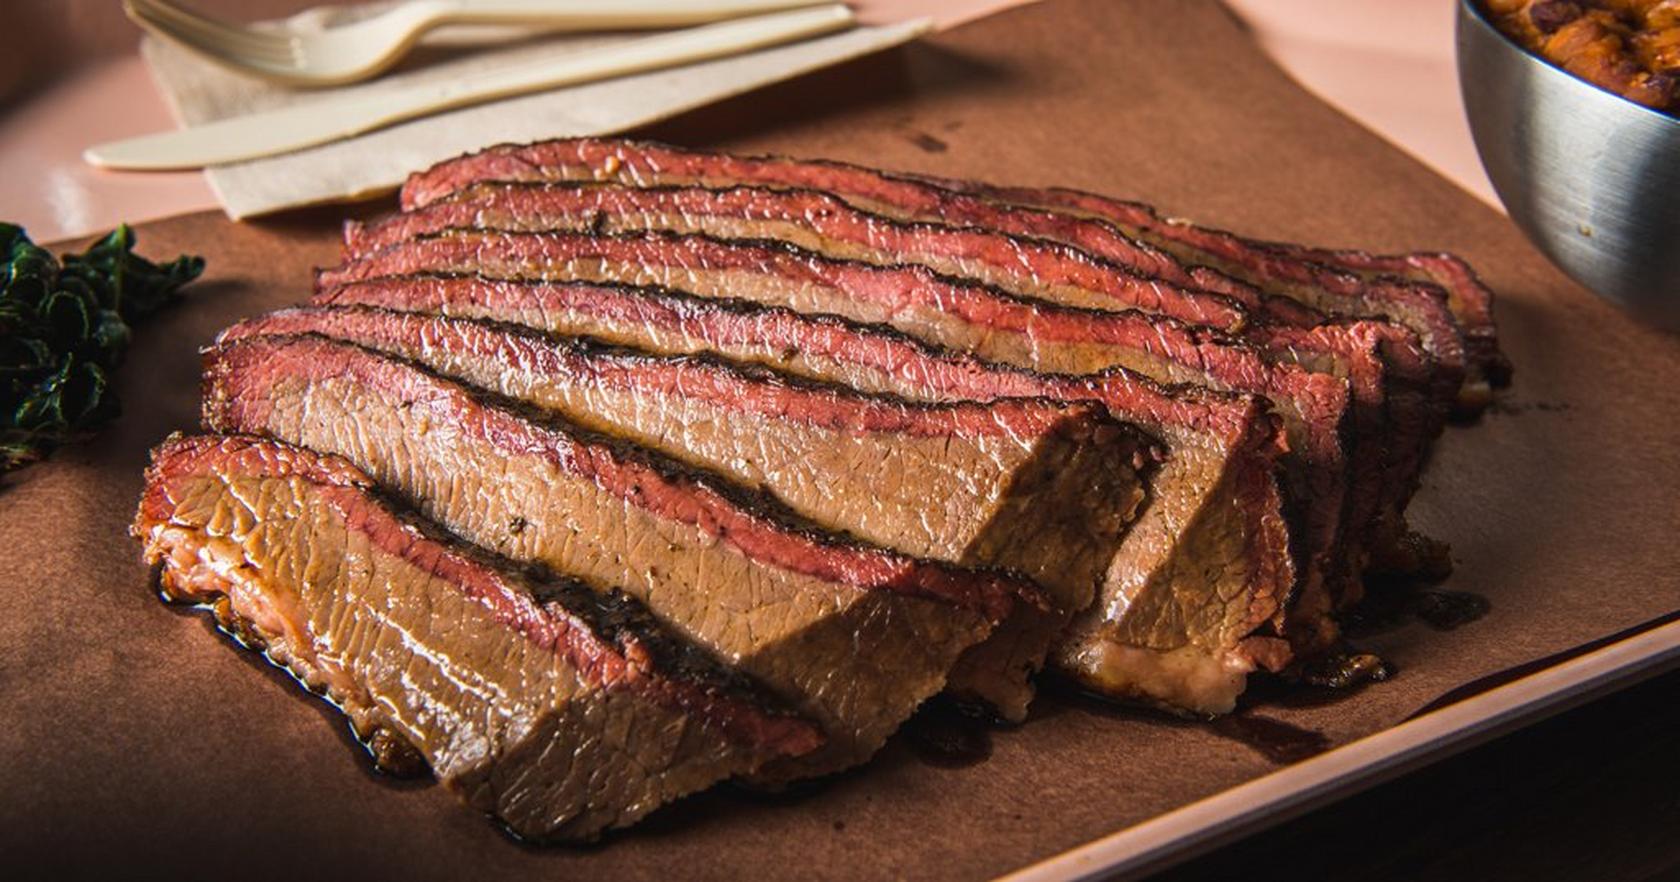 HOW TO MAKE THE BEST SMOKED BEEF BRISKET